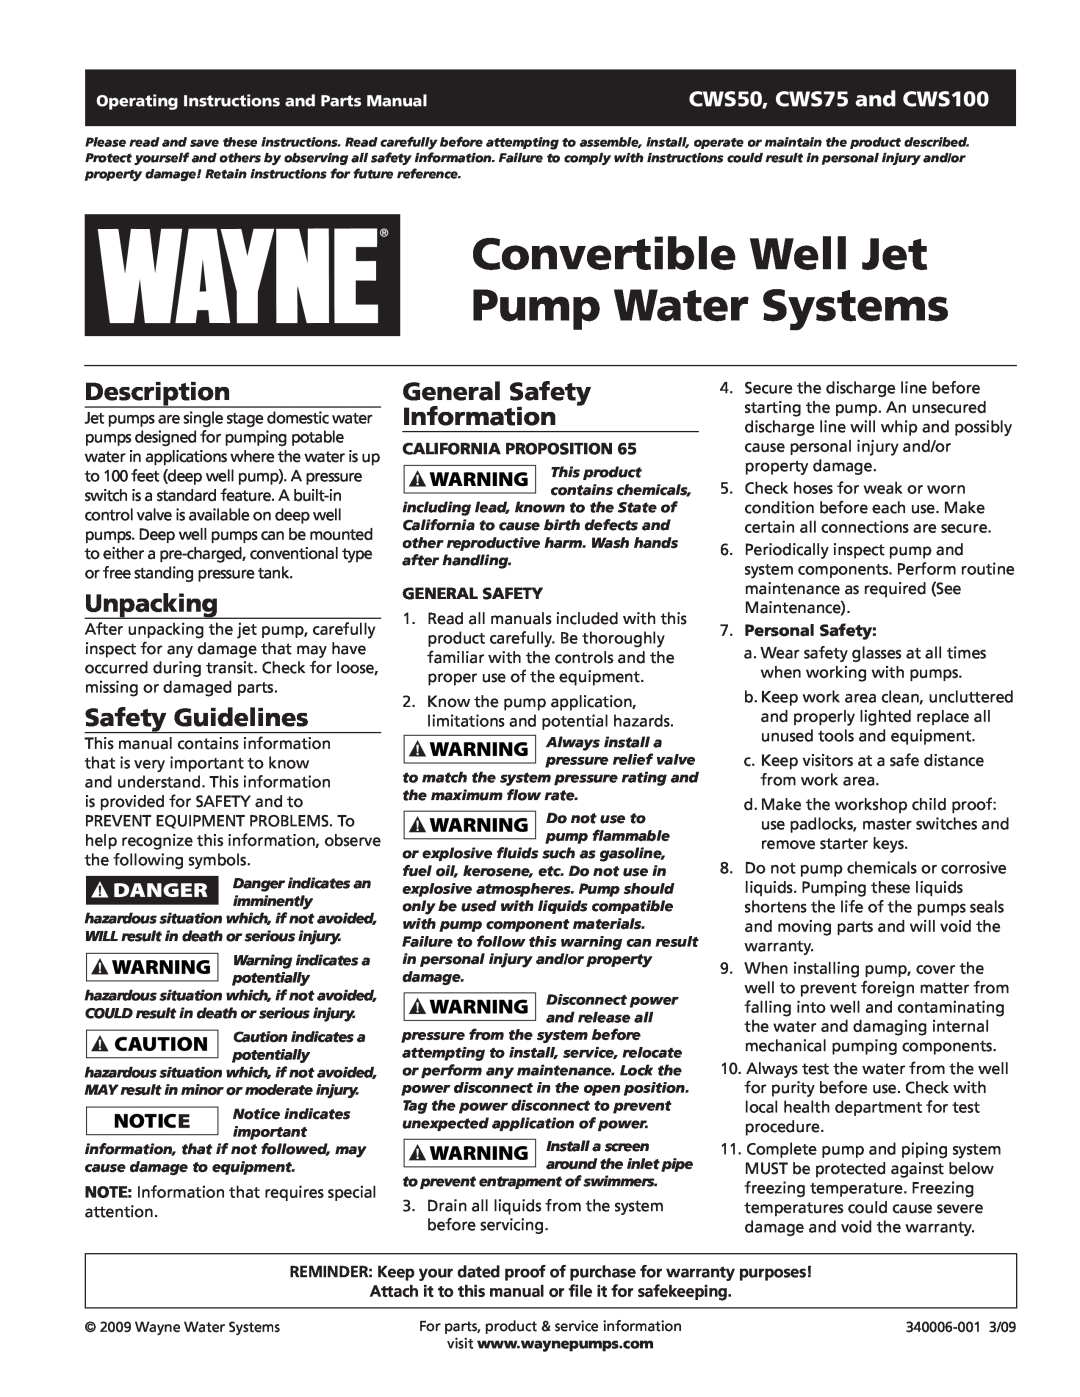 Wayne CWS75 warranty Convertible Well Jet Pump Water Systems, Description, Unpacking, Safety Guidelines, General Safety 